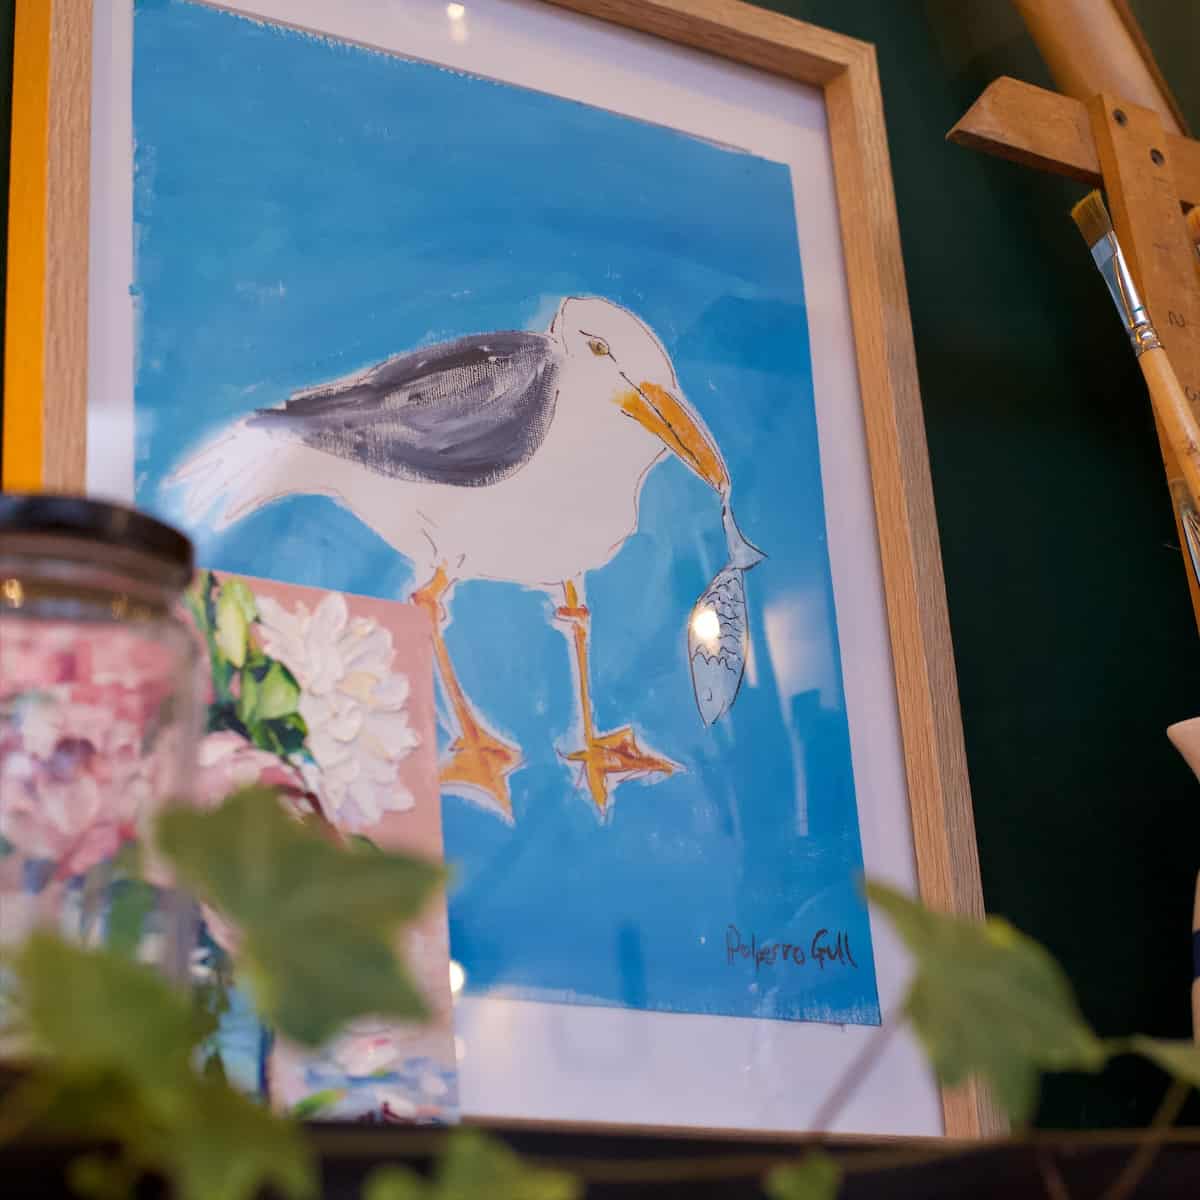 Painting of a seagull eating a fish in a bright naive style on a shelf with green ivy leaves